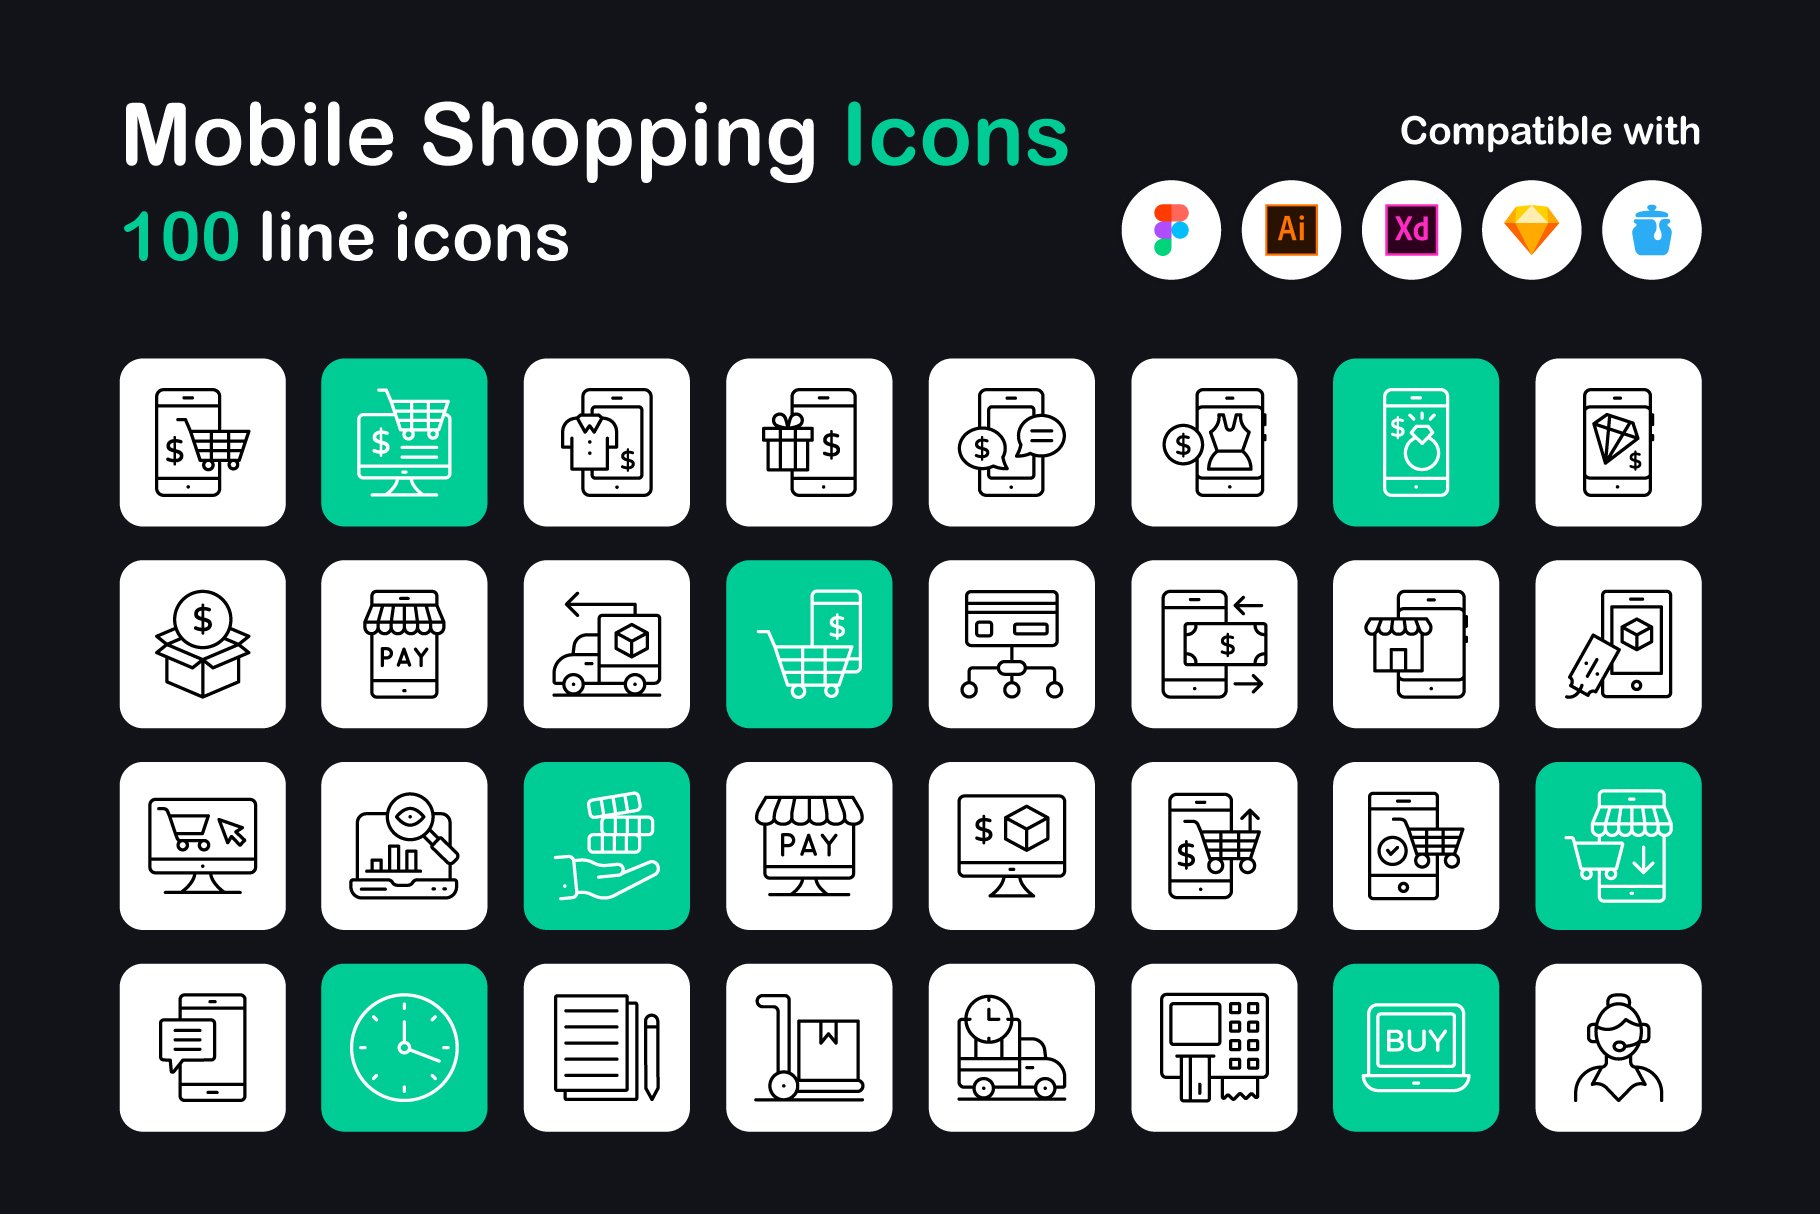 Mobile Shopping Linear Icons Pack cover image.